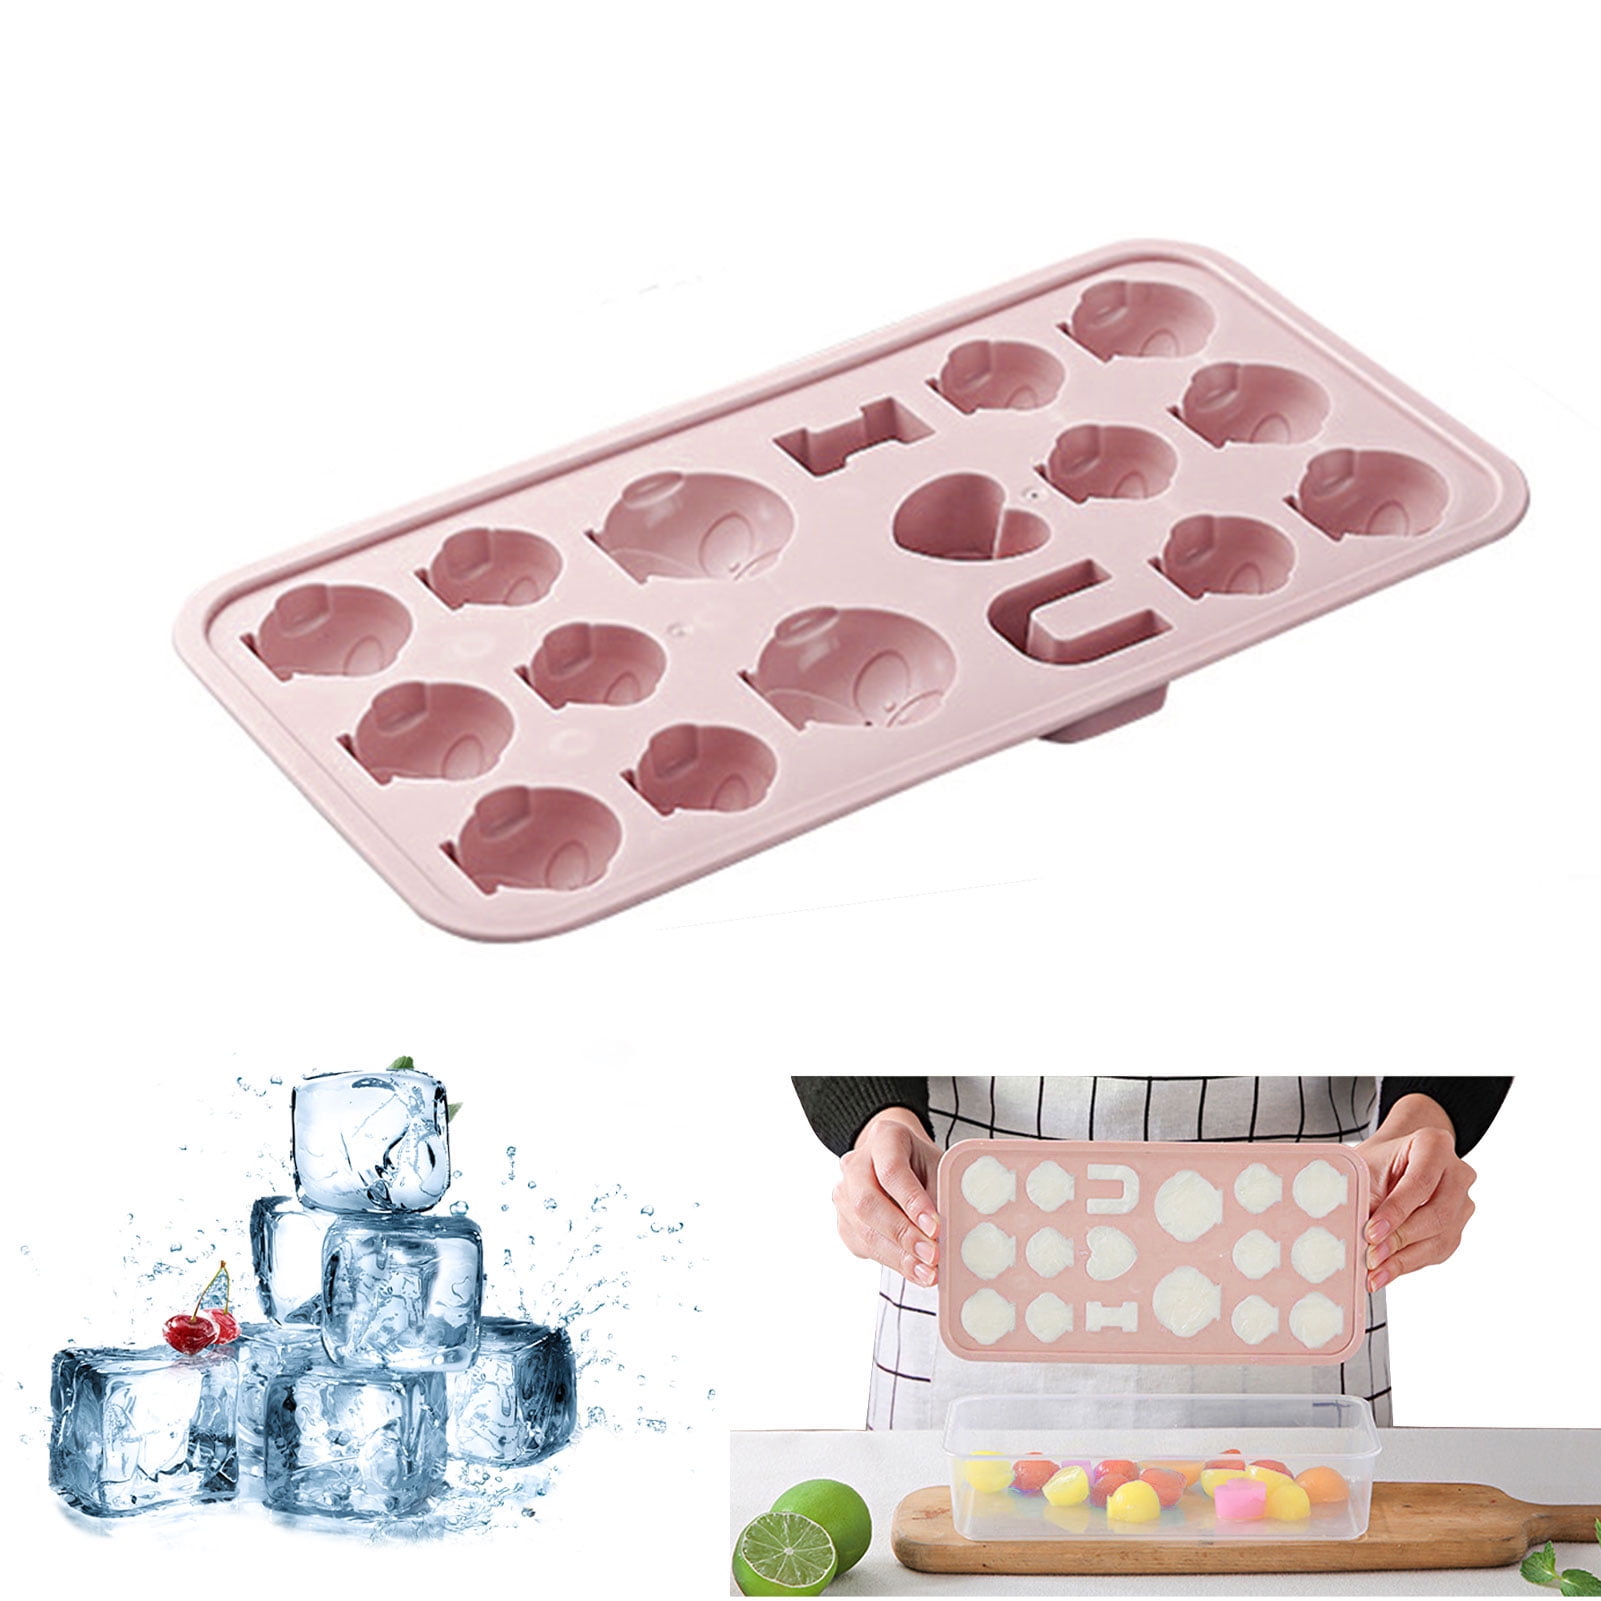 Bullet Shape Ice Cube Mold Maker Bar Party Silicone Trays Chocolate Mold Gifts 